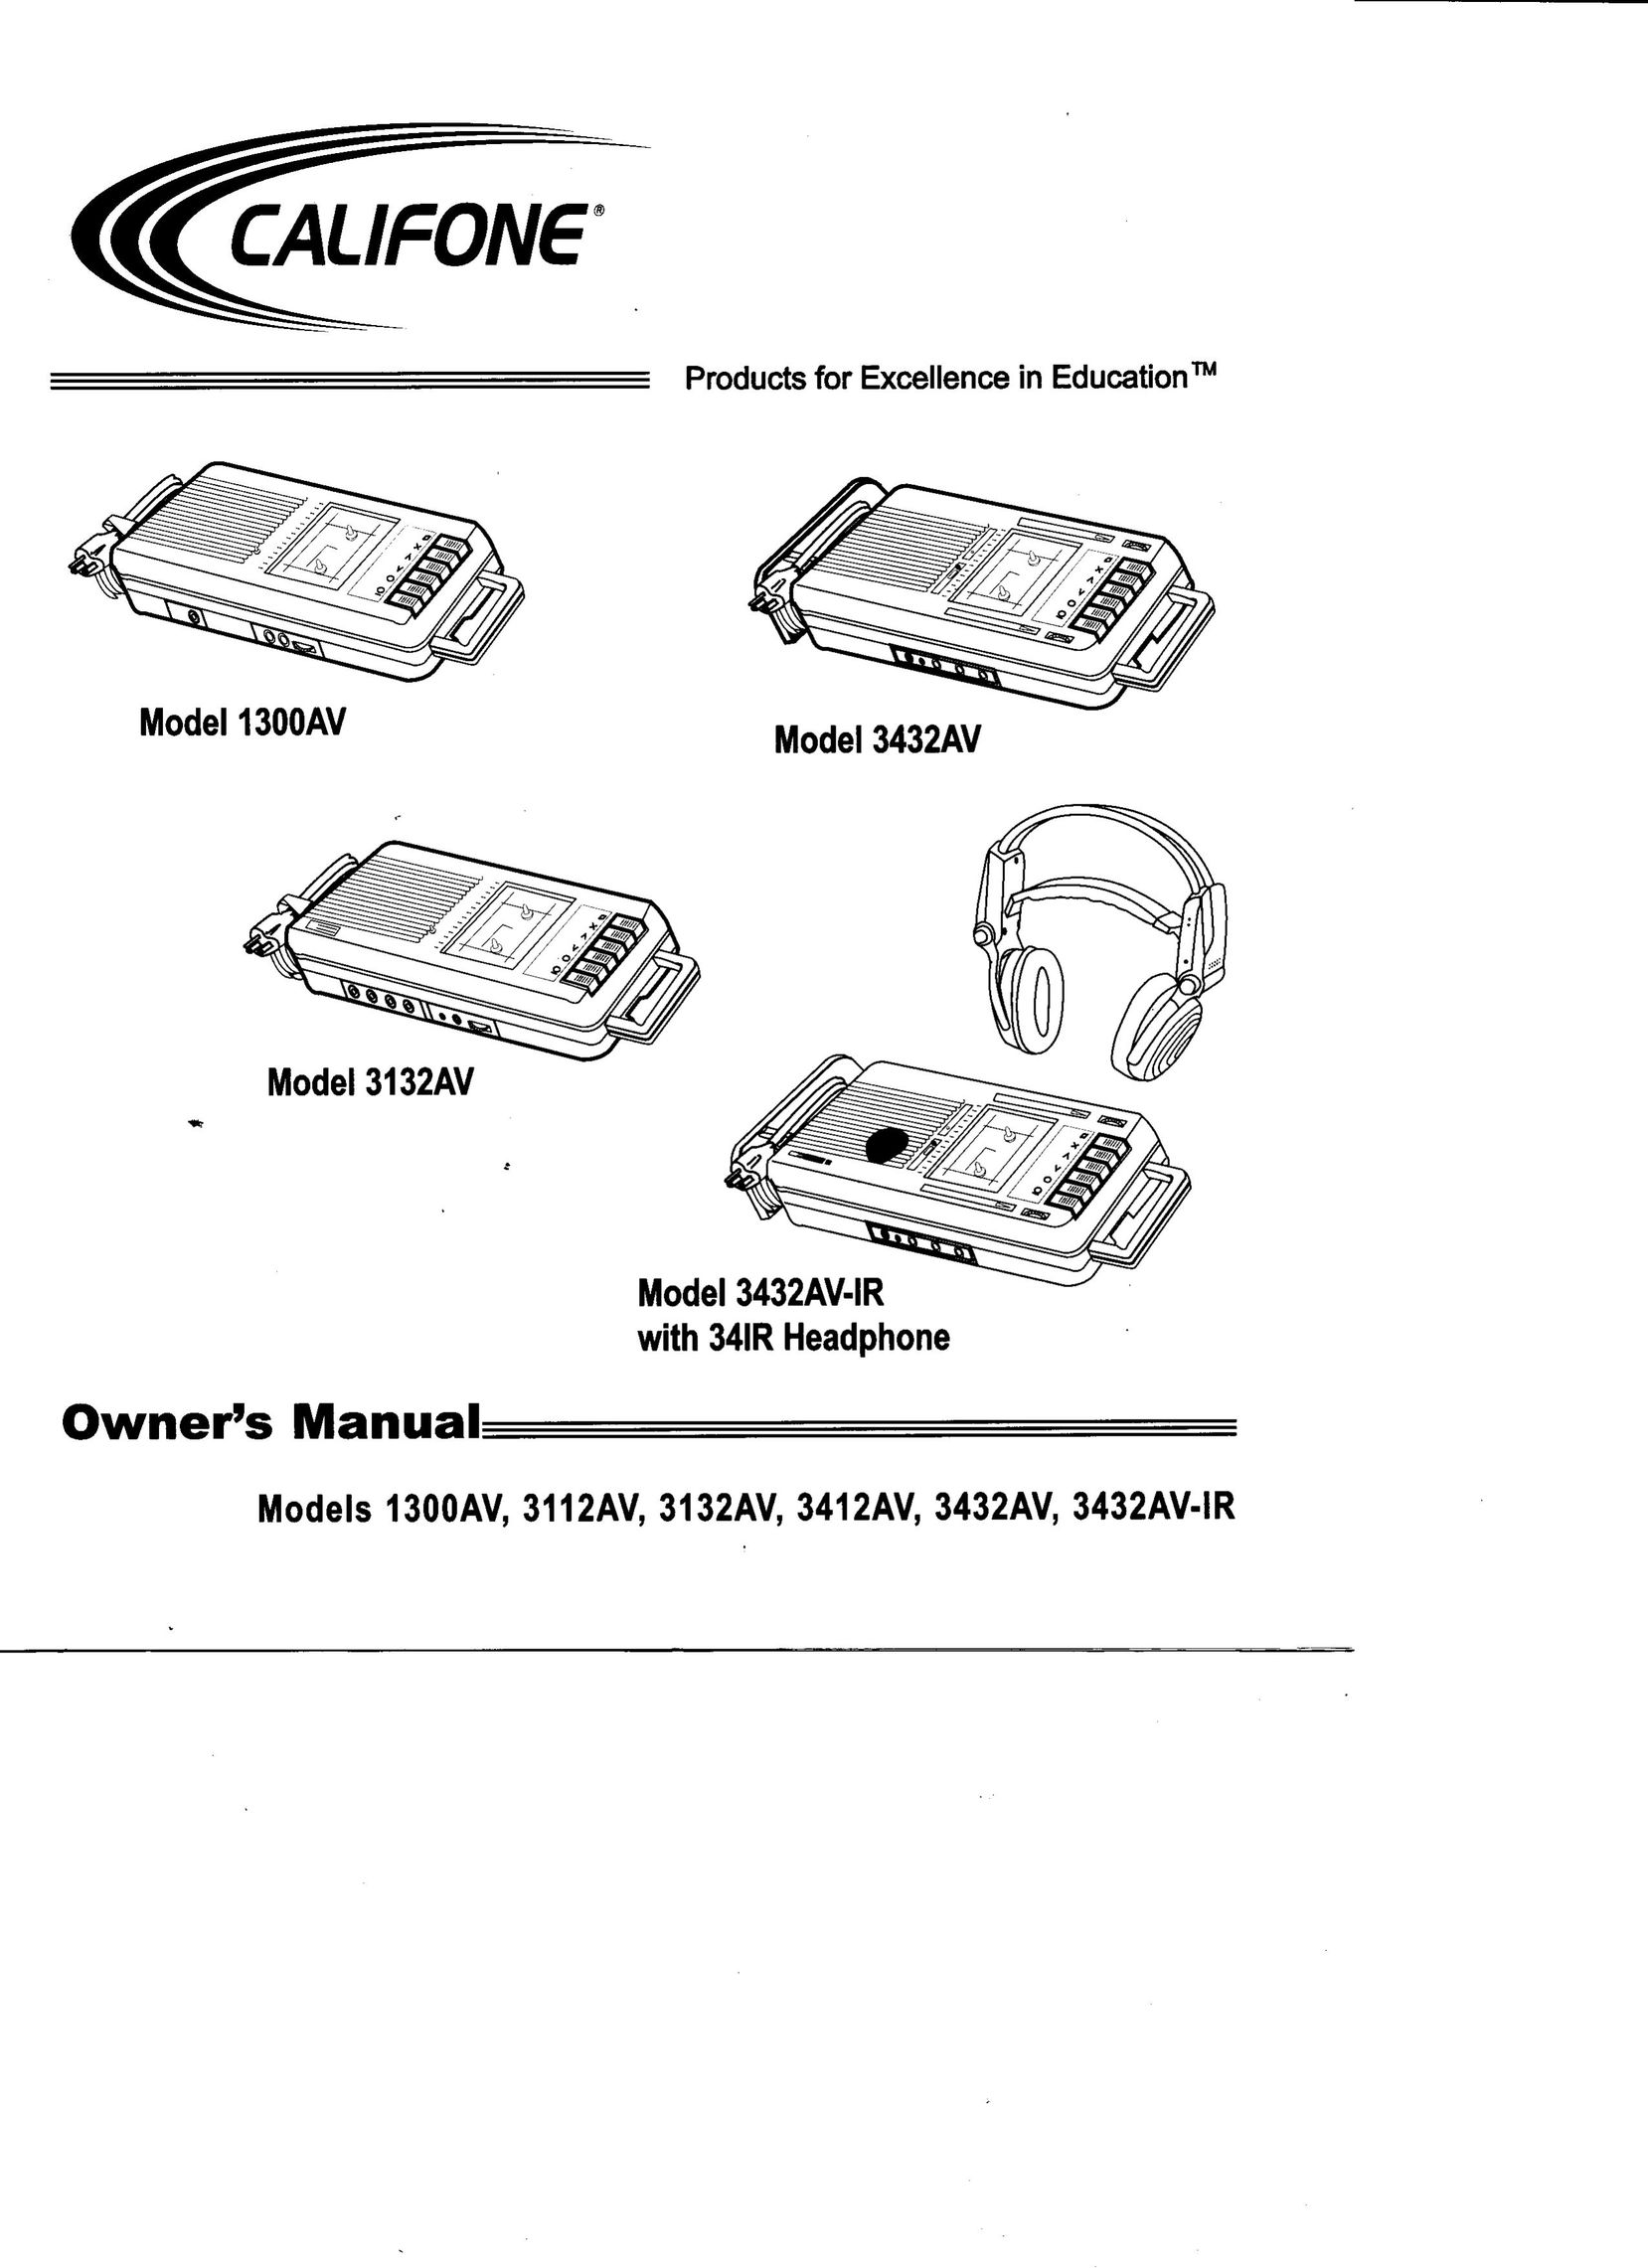 Califone 3432IR Cassette Player User Manual (Page 1)